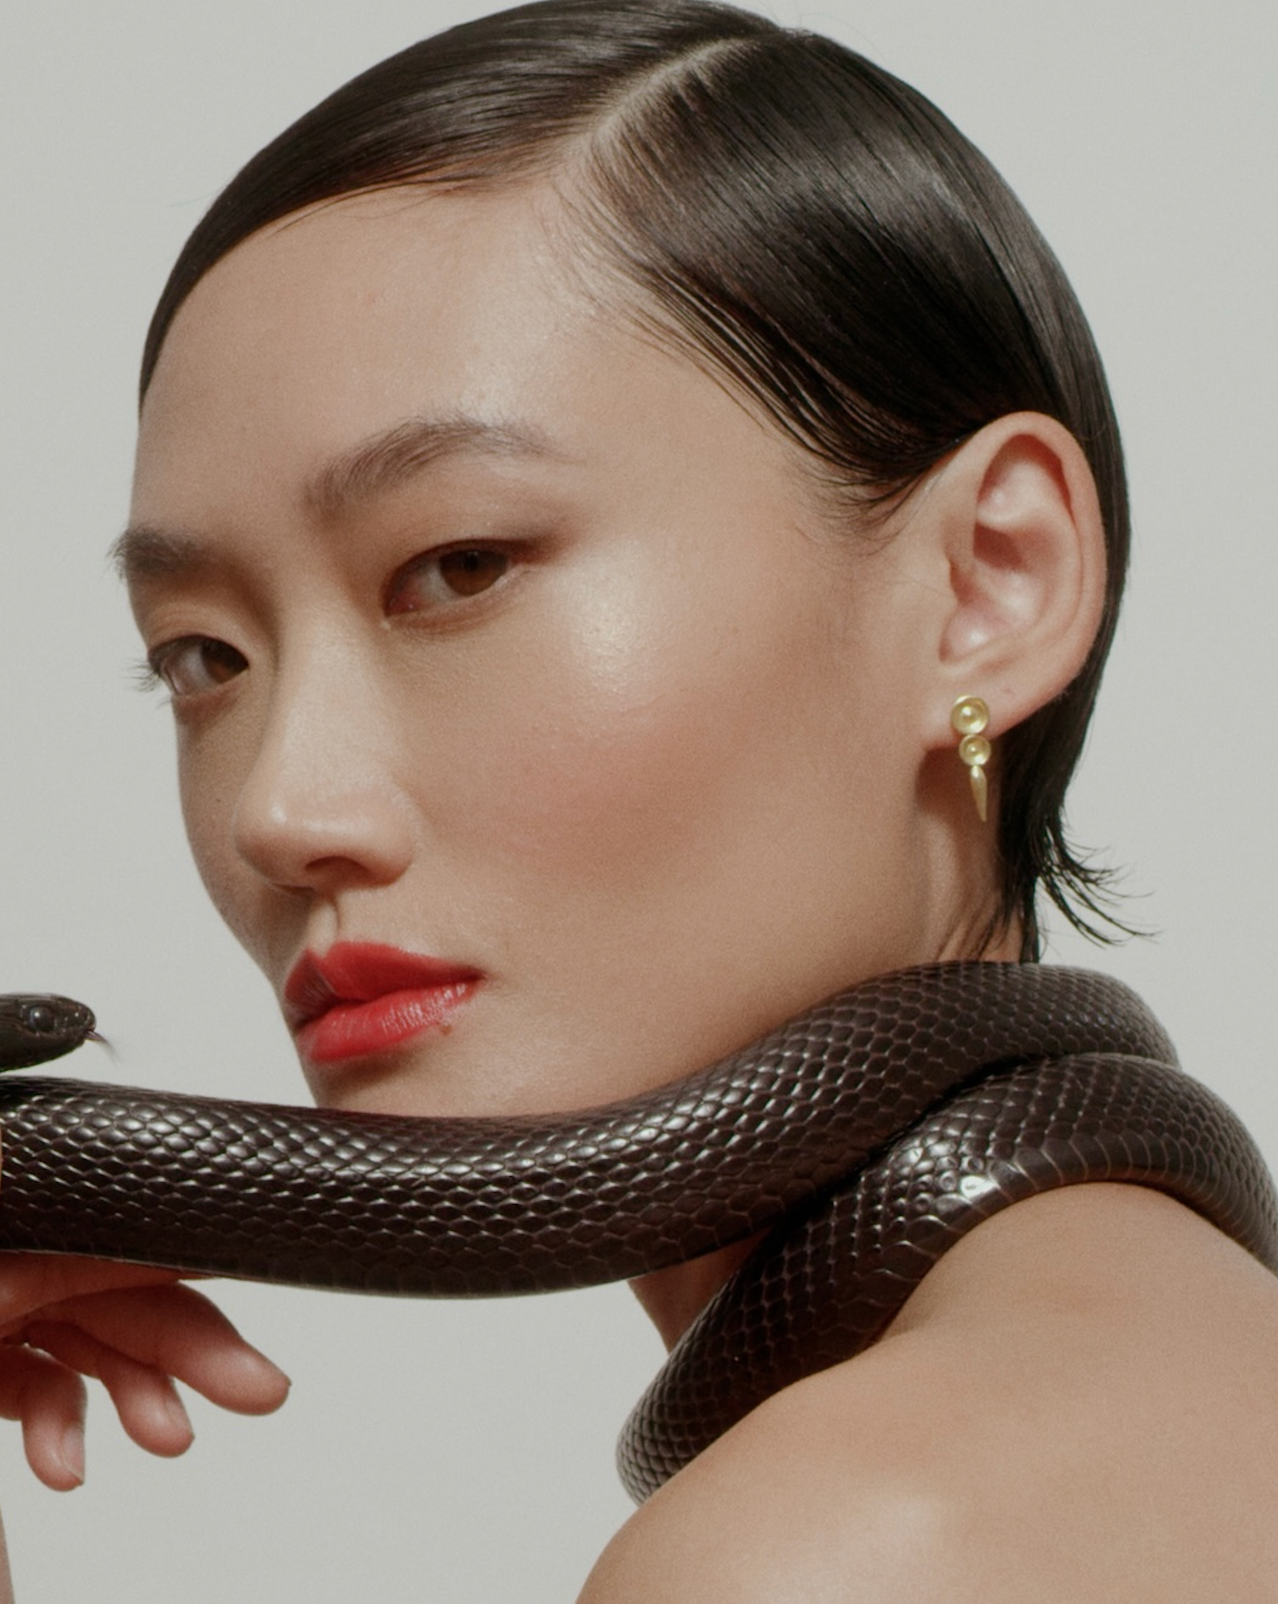 Model wears i seira gold earrings with a snake draped over her body